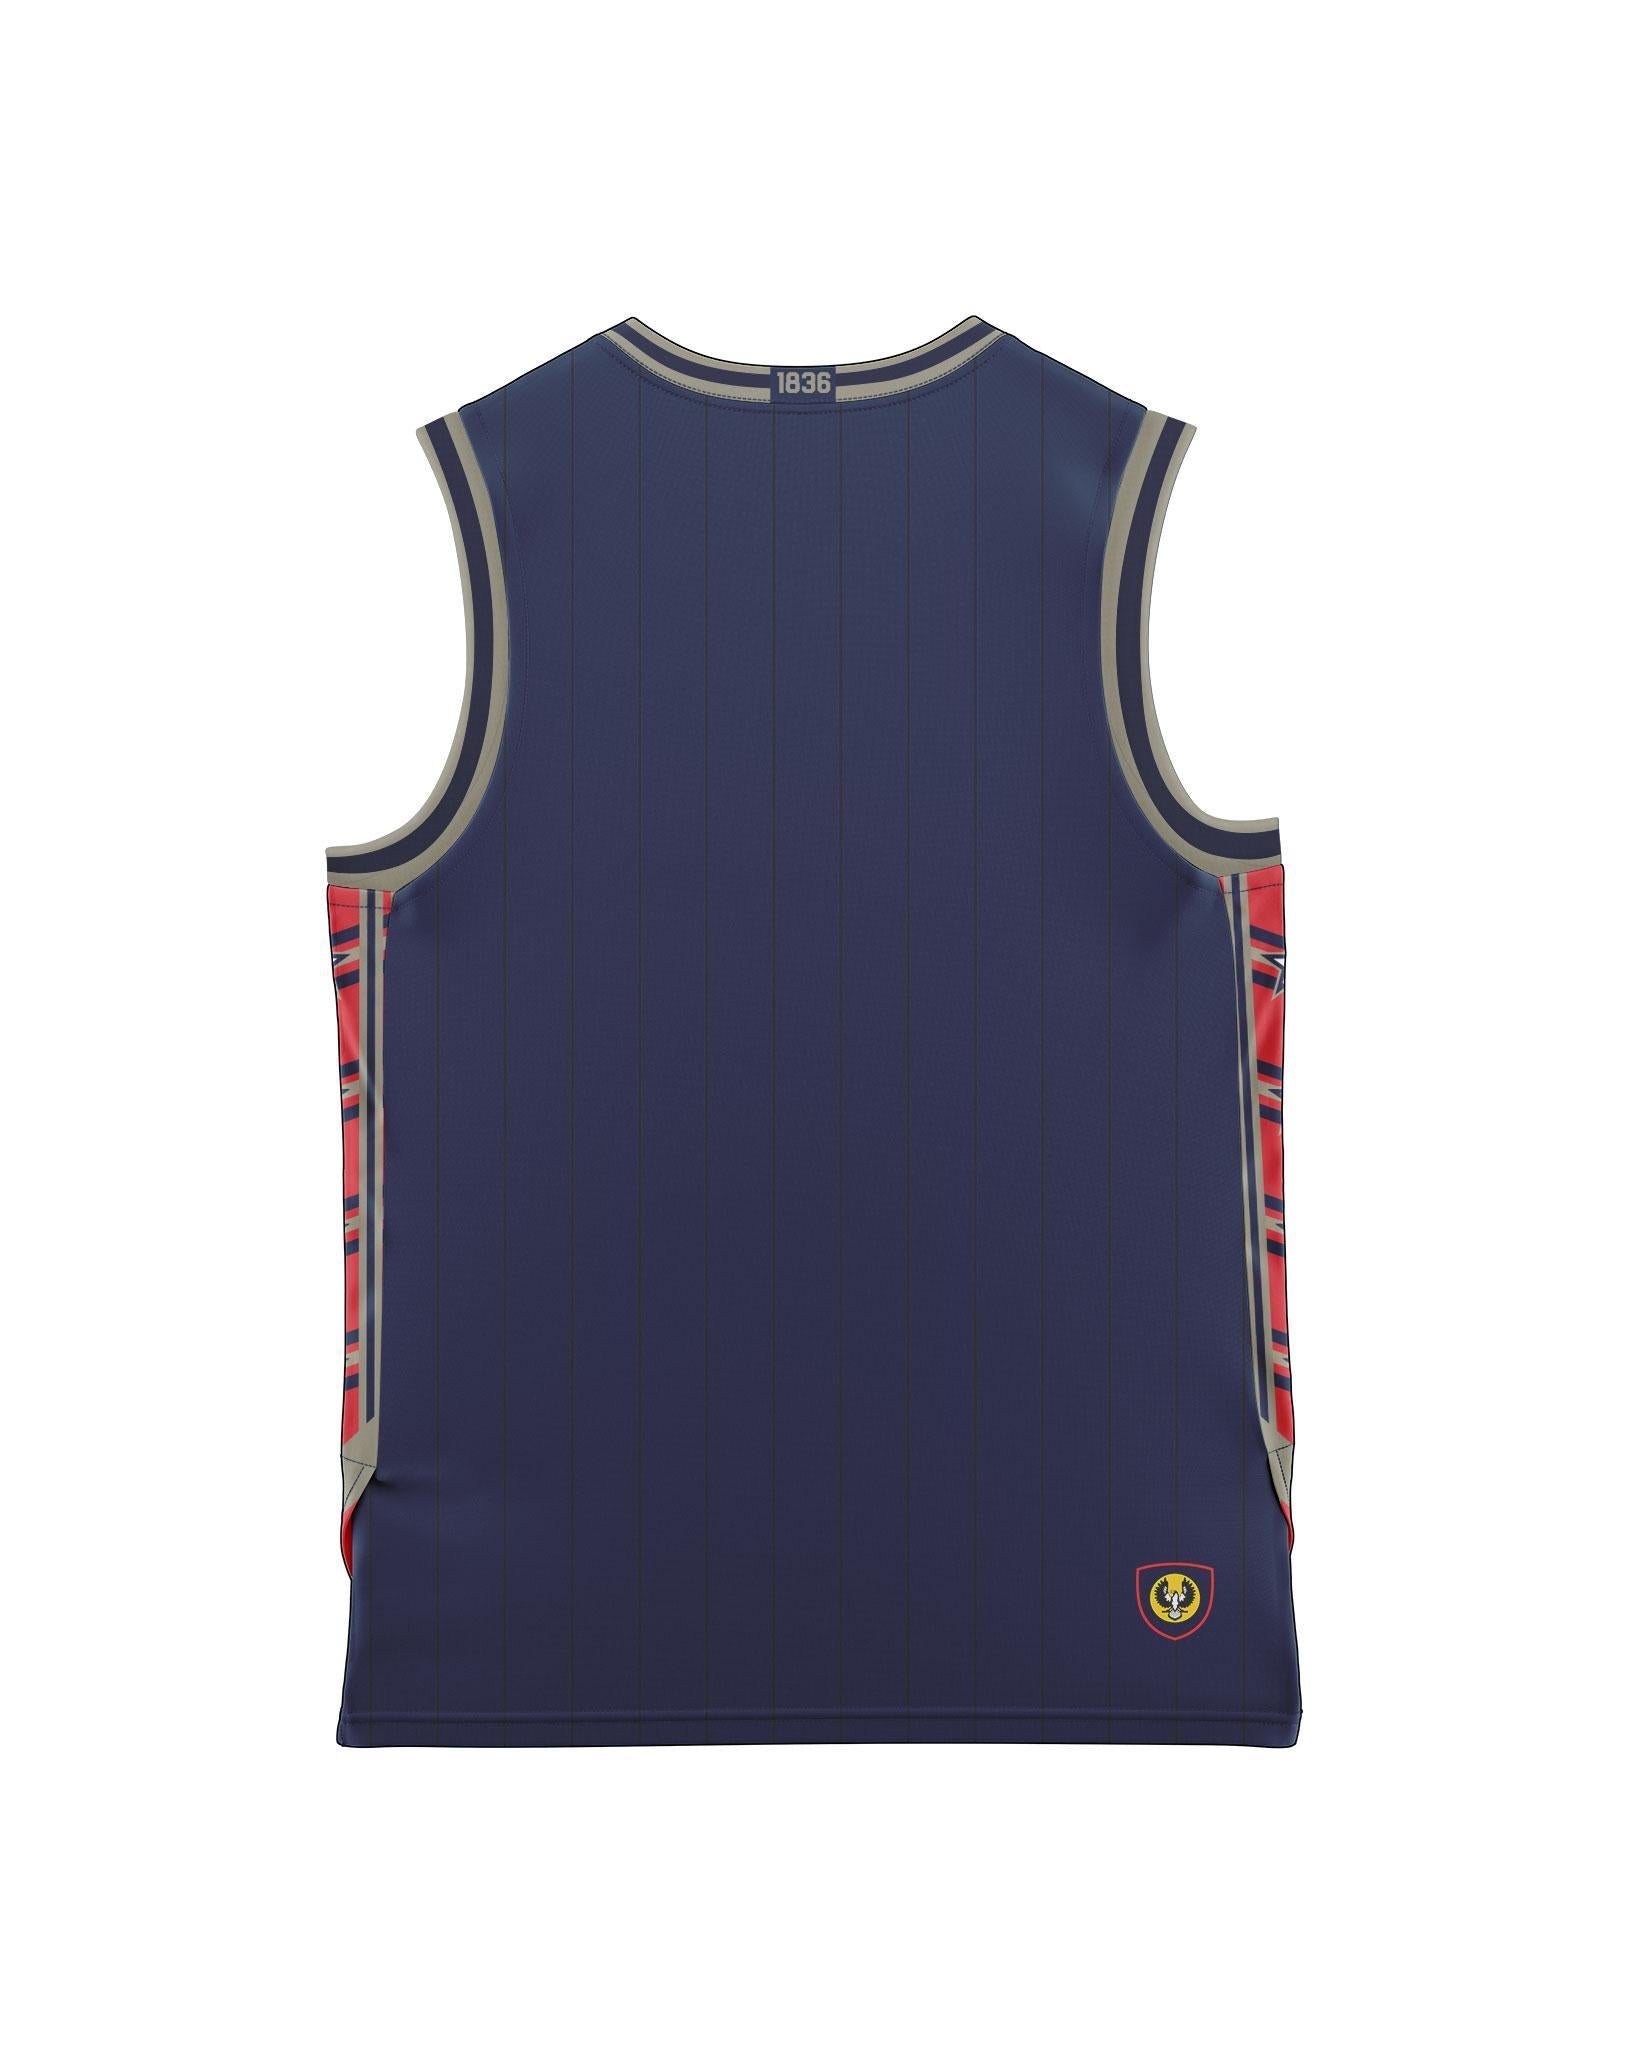 Adelaide 36ers 2021/22 Authentic Infant Home Jersey - Adelaide 36ers